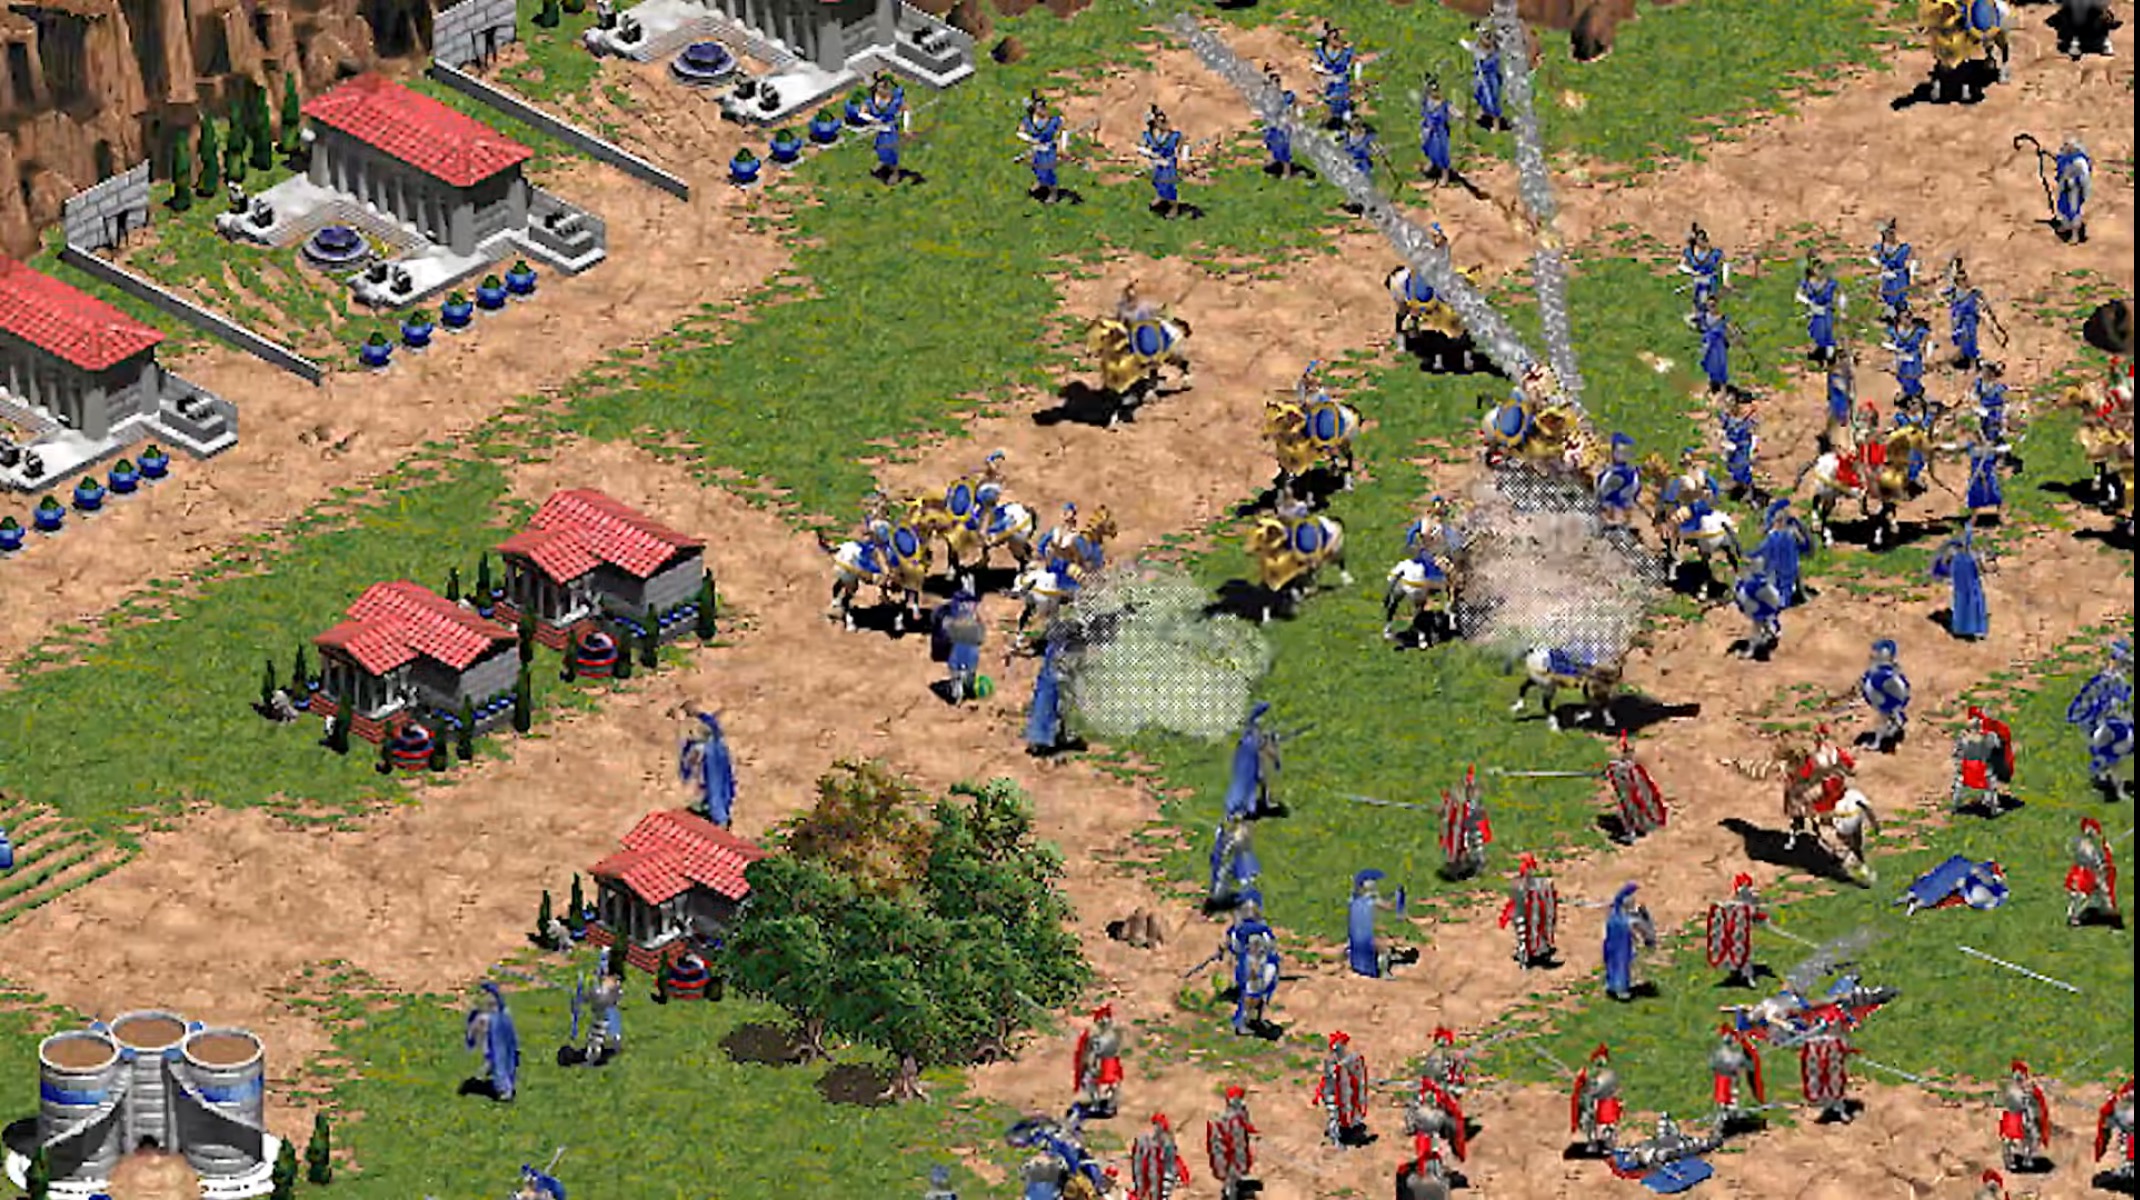 『Age of empires』25周年